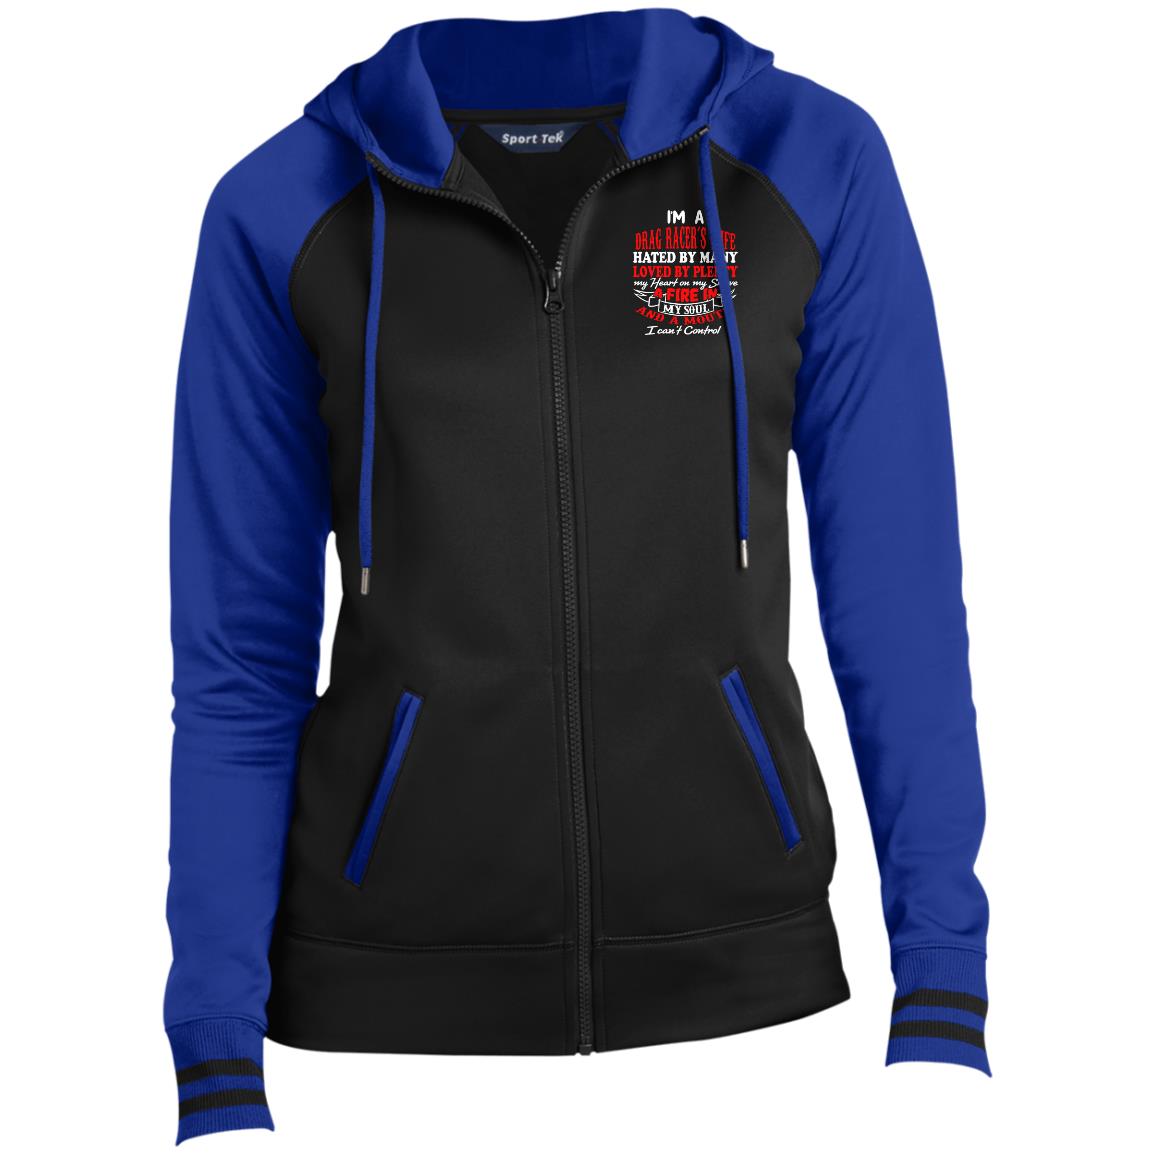 I'm A Drag Racer's Wife Hated By Many Loved By Plenty Ladies' Sport-Wick® Full-Zip Hooded Jacket